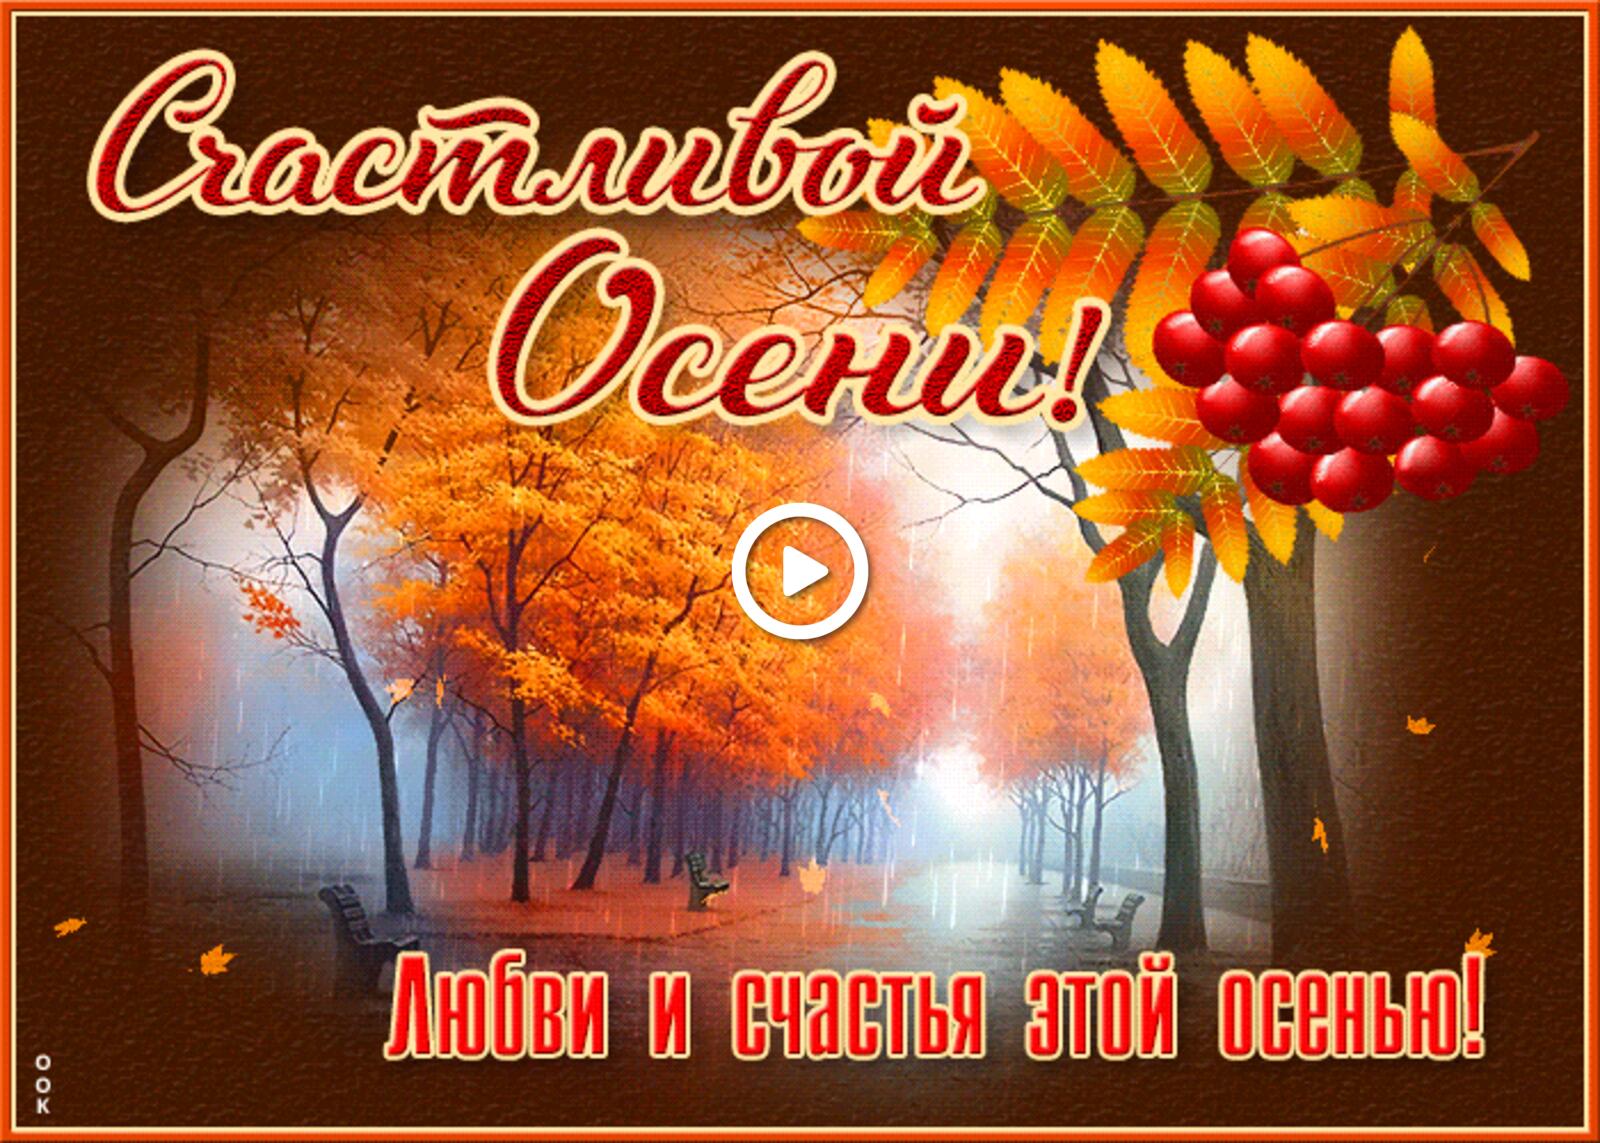 A postcard on the subject of beautiful happy autumn a rowanberry trees for free